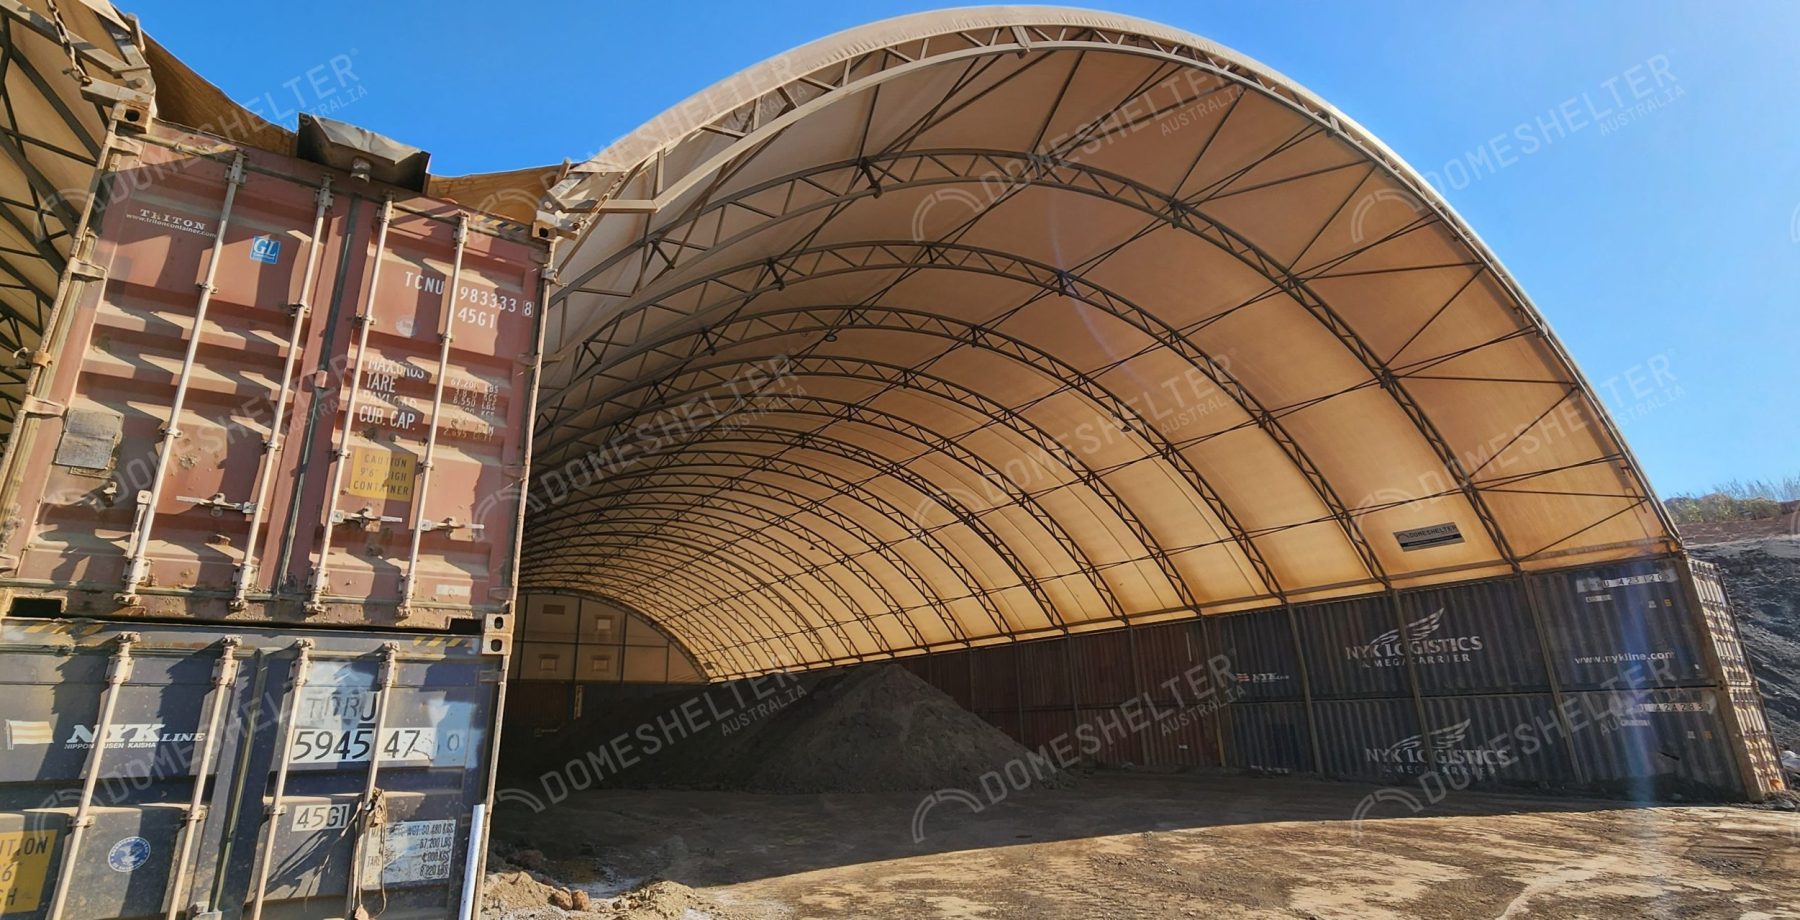 Nyrstar Port Pirie Dust Control Dome Shelter